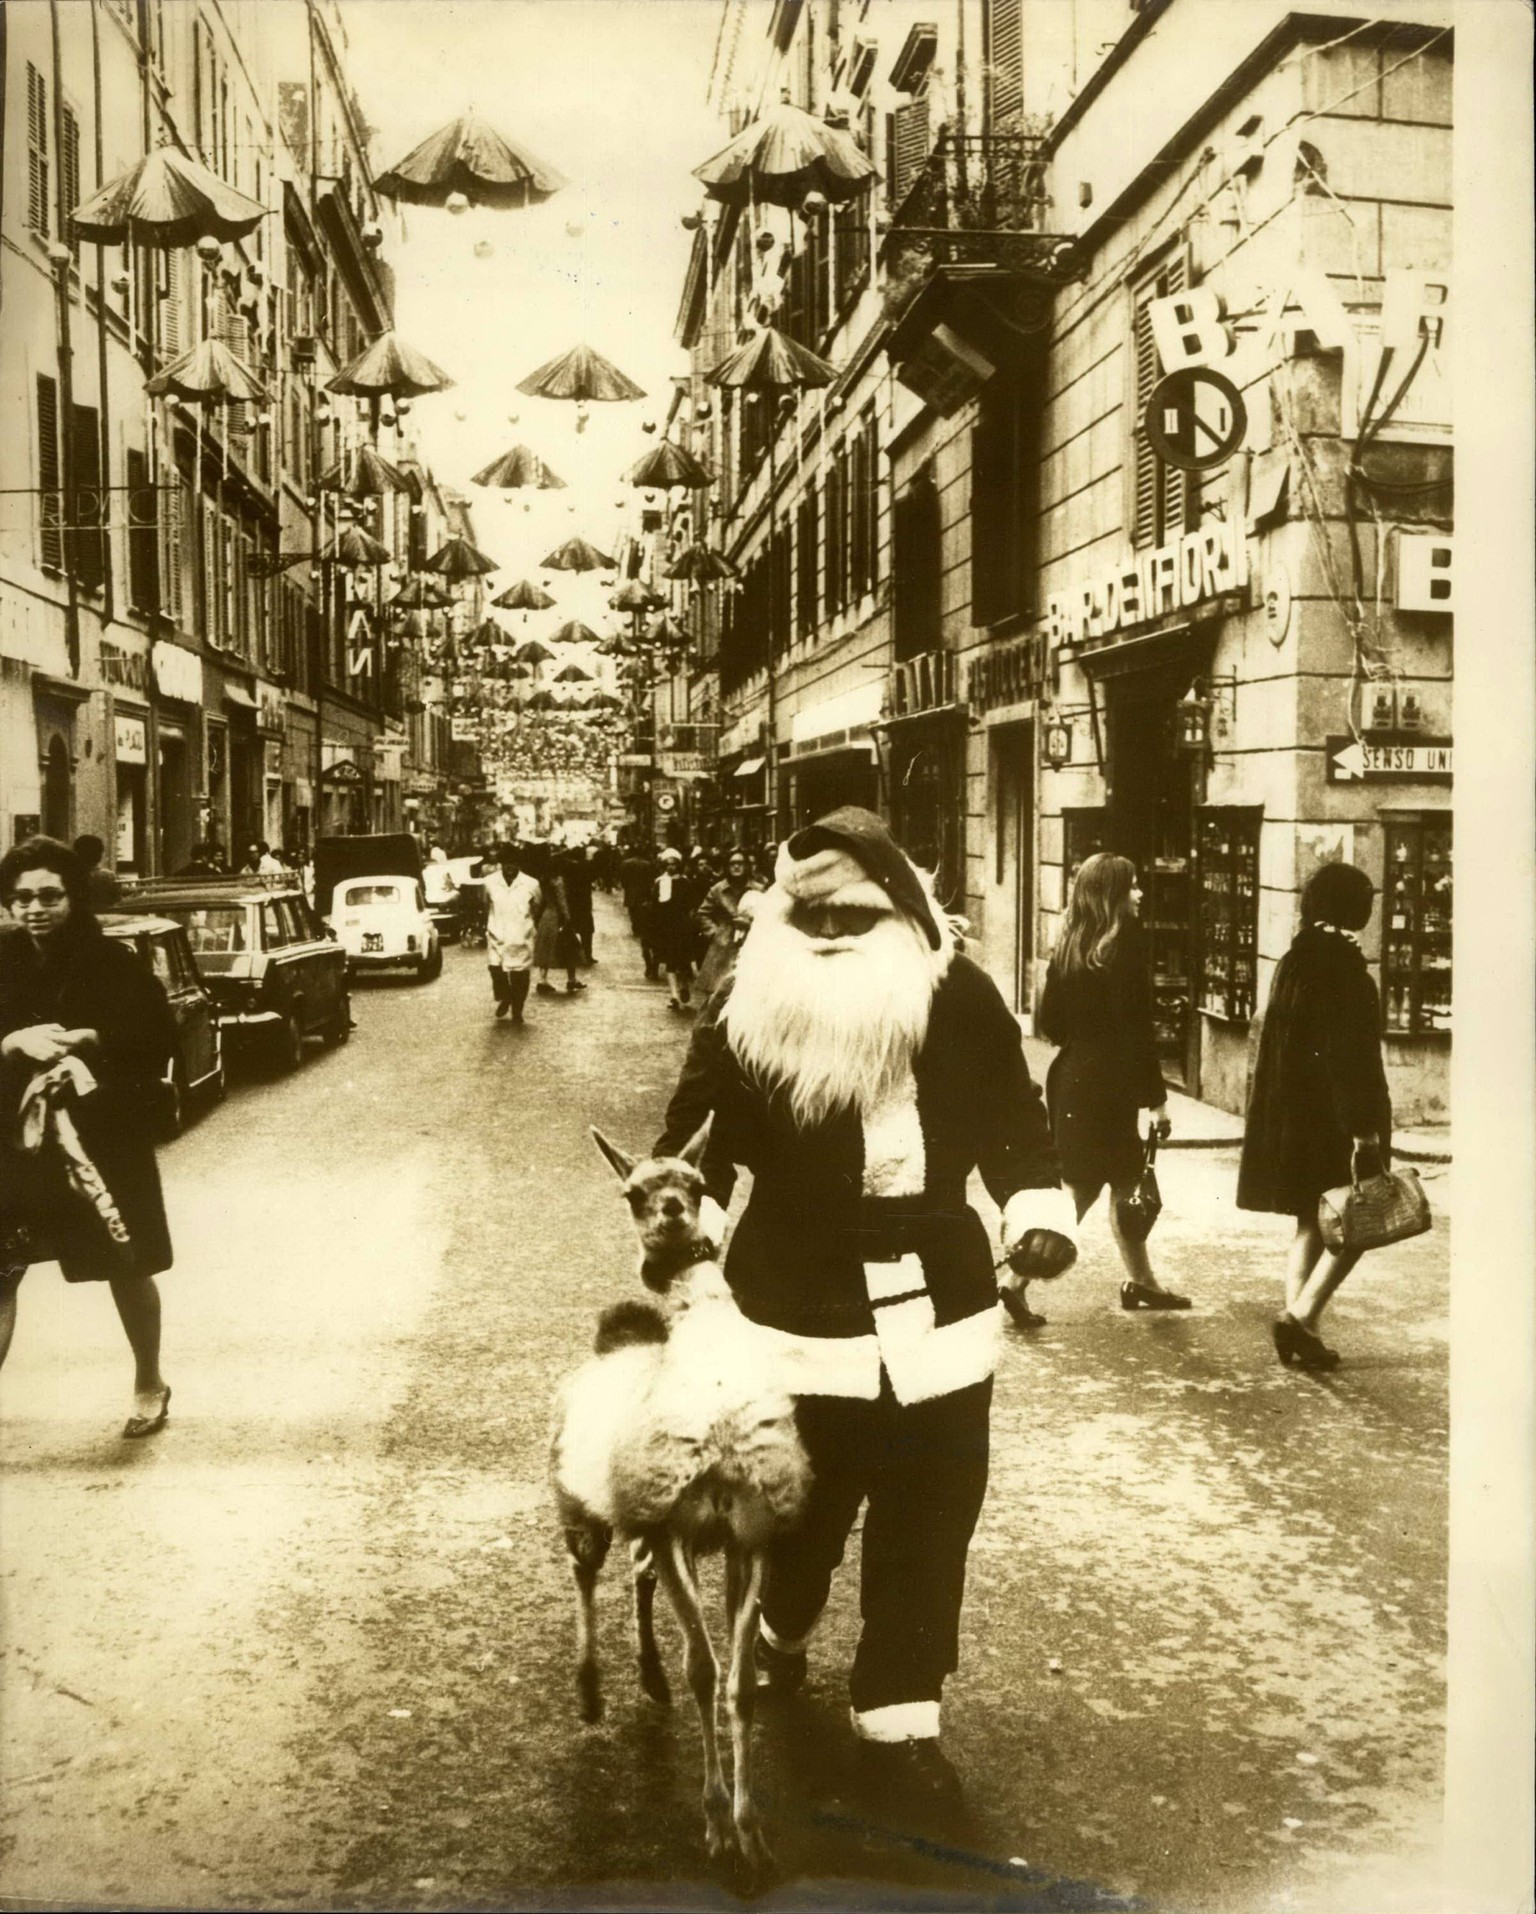 Dec. 15, 1969 - The Christmas scene in Rome.: Sign of the festive season as Santa Claus take a roll down the gaily decorated via Frattina in Rome. PUBLICATIONxINxGERxONLY - ZUMAk09

DEC 15 1969 The Ch ...